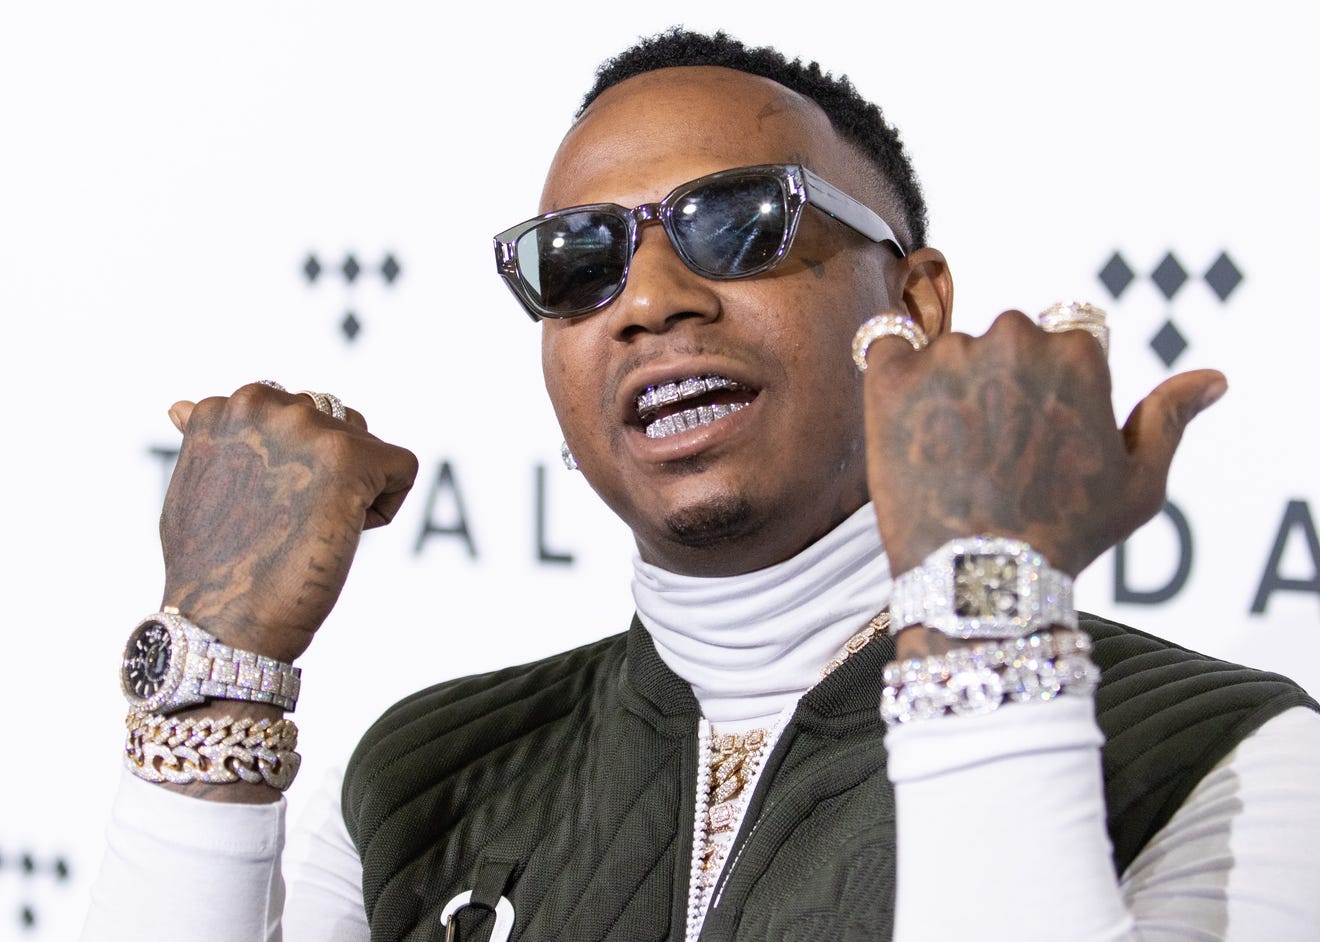 Moneybagg Yo will headline a Cannon Center concert on Sept. 